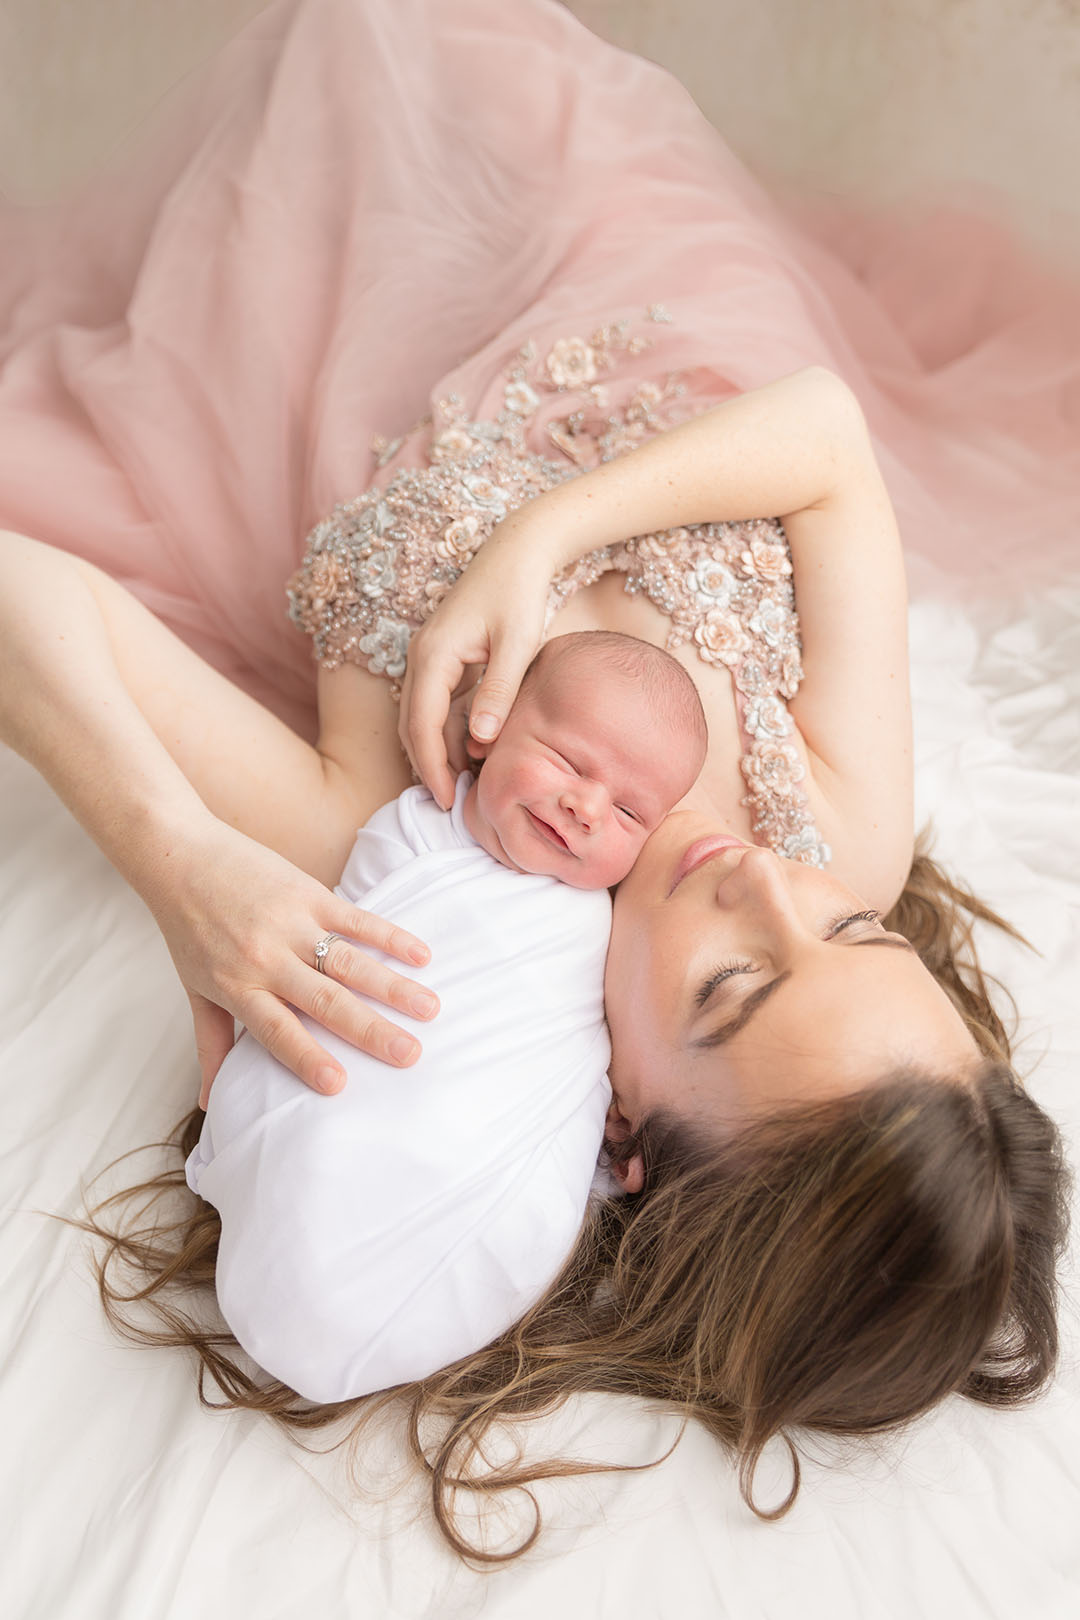 New mum wearing a gown with beads and floral detail on the bodice with tulle skirt. She's lying posed with her new baby wrapped in a white wrap. baby is smiling softly 